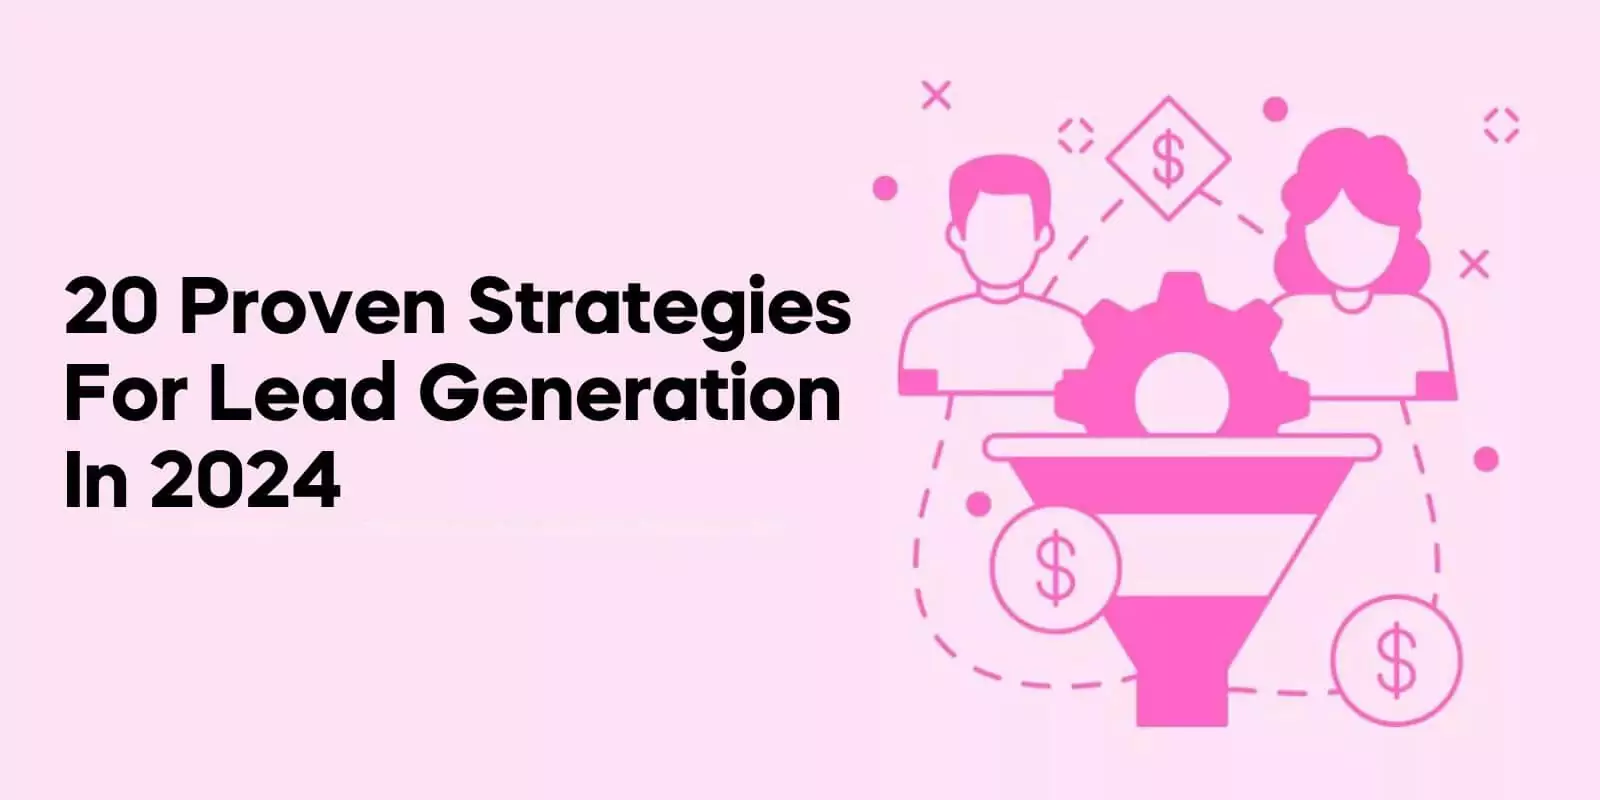 20 Proven Strategies for Lead Generation in 2024